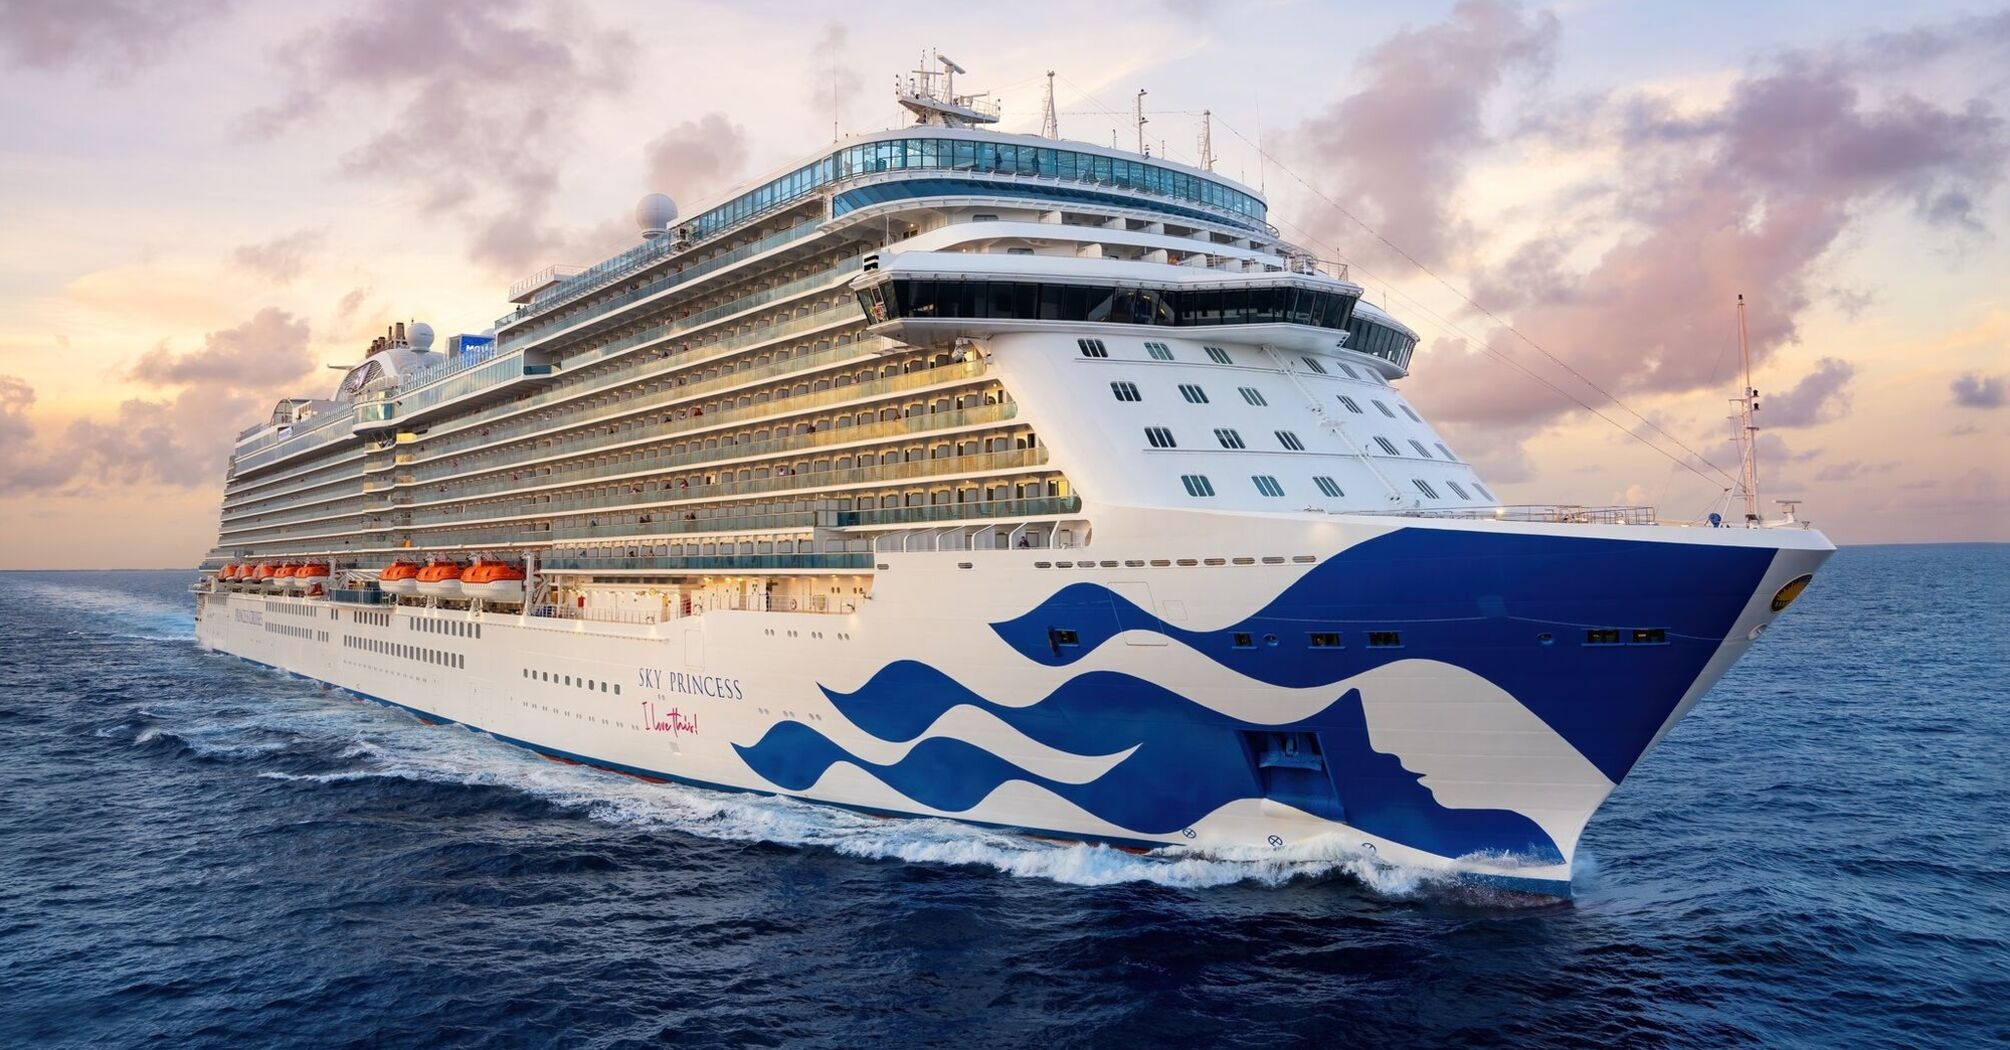 The themed cruise "Love Boat" will set sail later this year